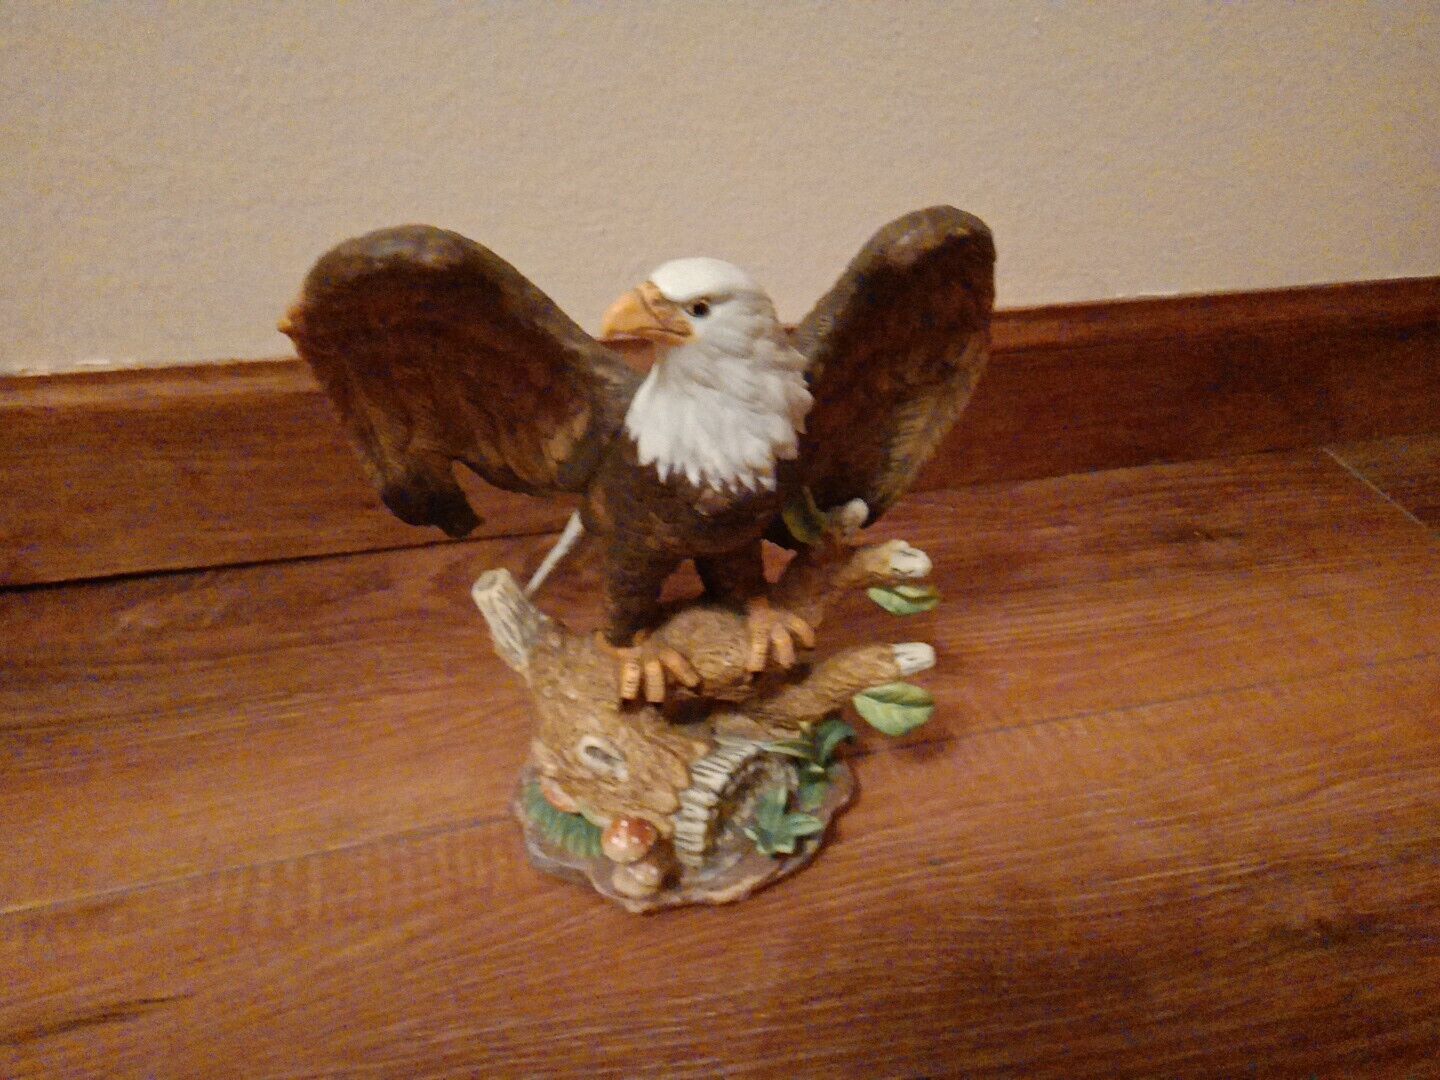 Patriotic American Eagle Ceramic Figurine - Bald Eagle with Claws Out